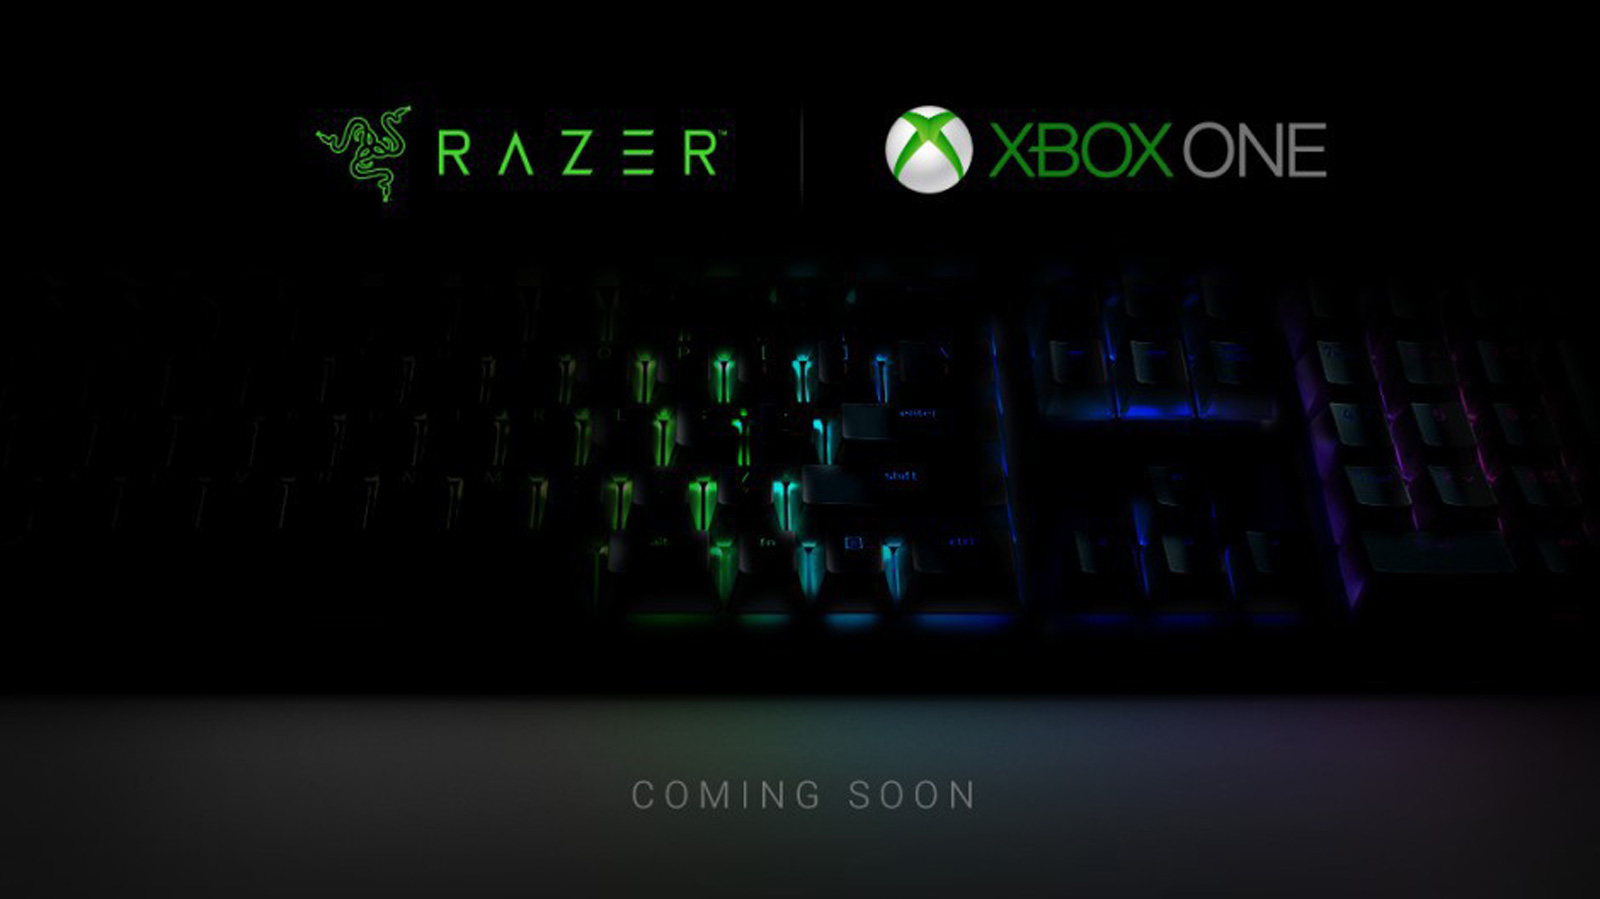 photo of Xbox One mouse and keyboard support is coming with Razer's help image